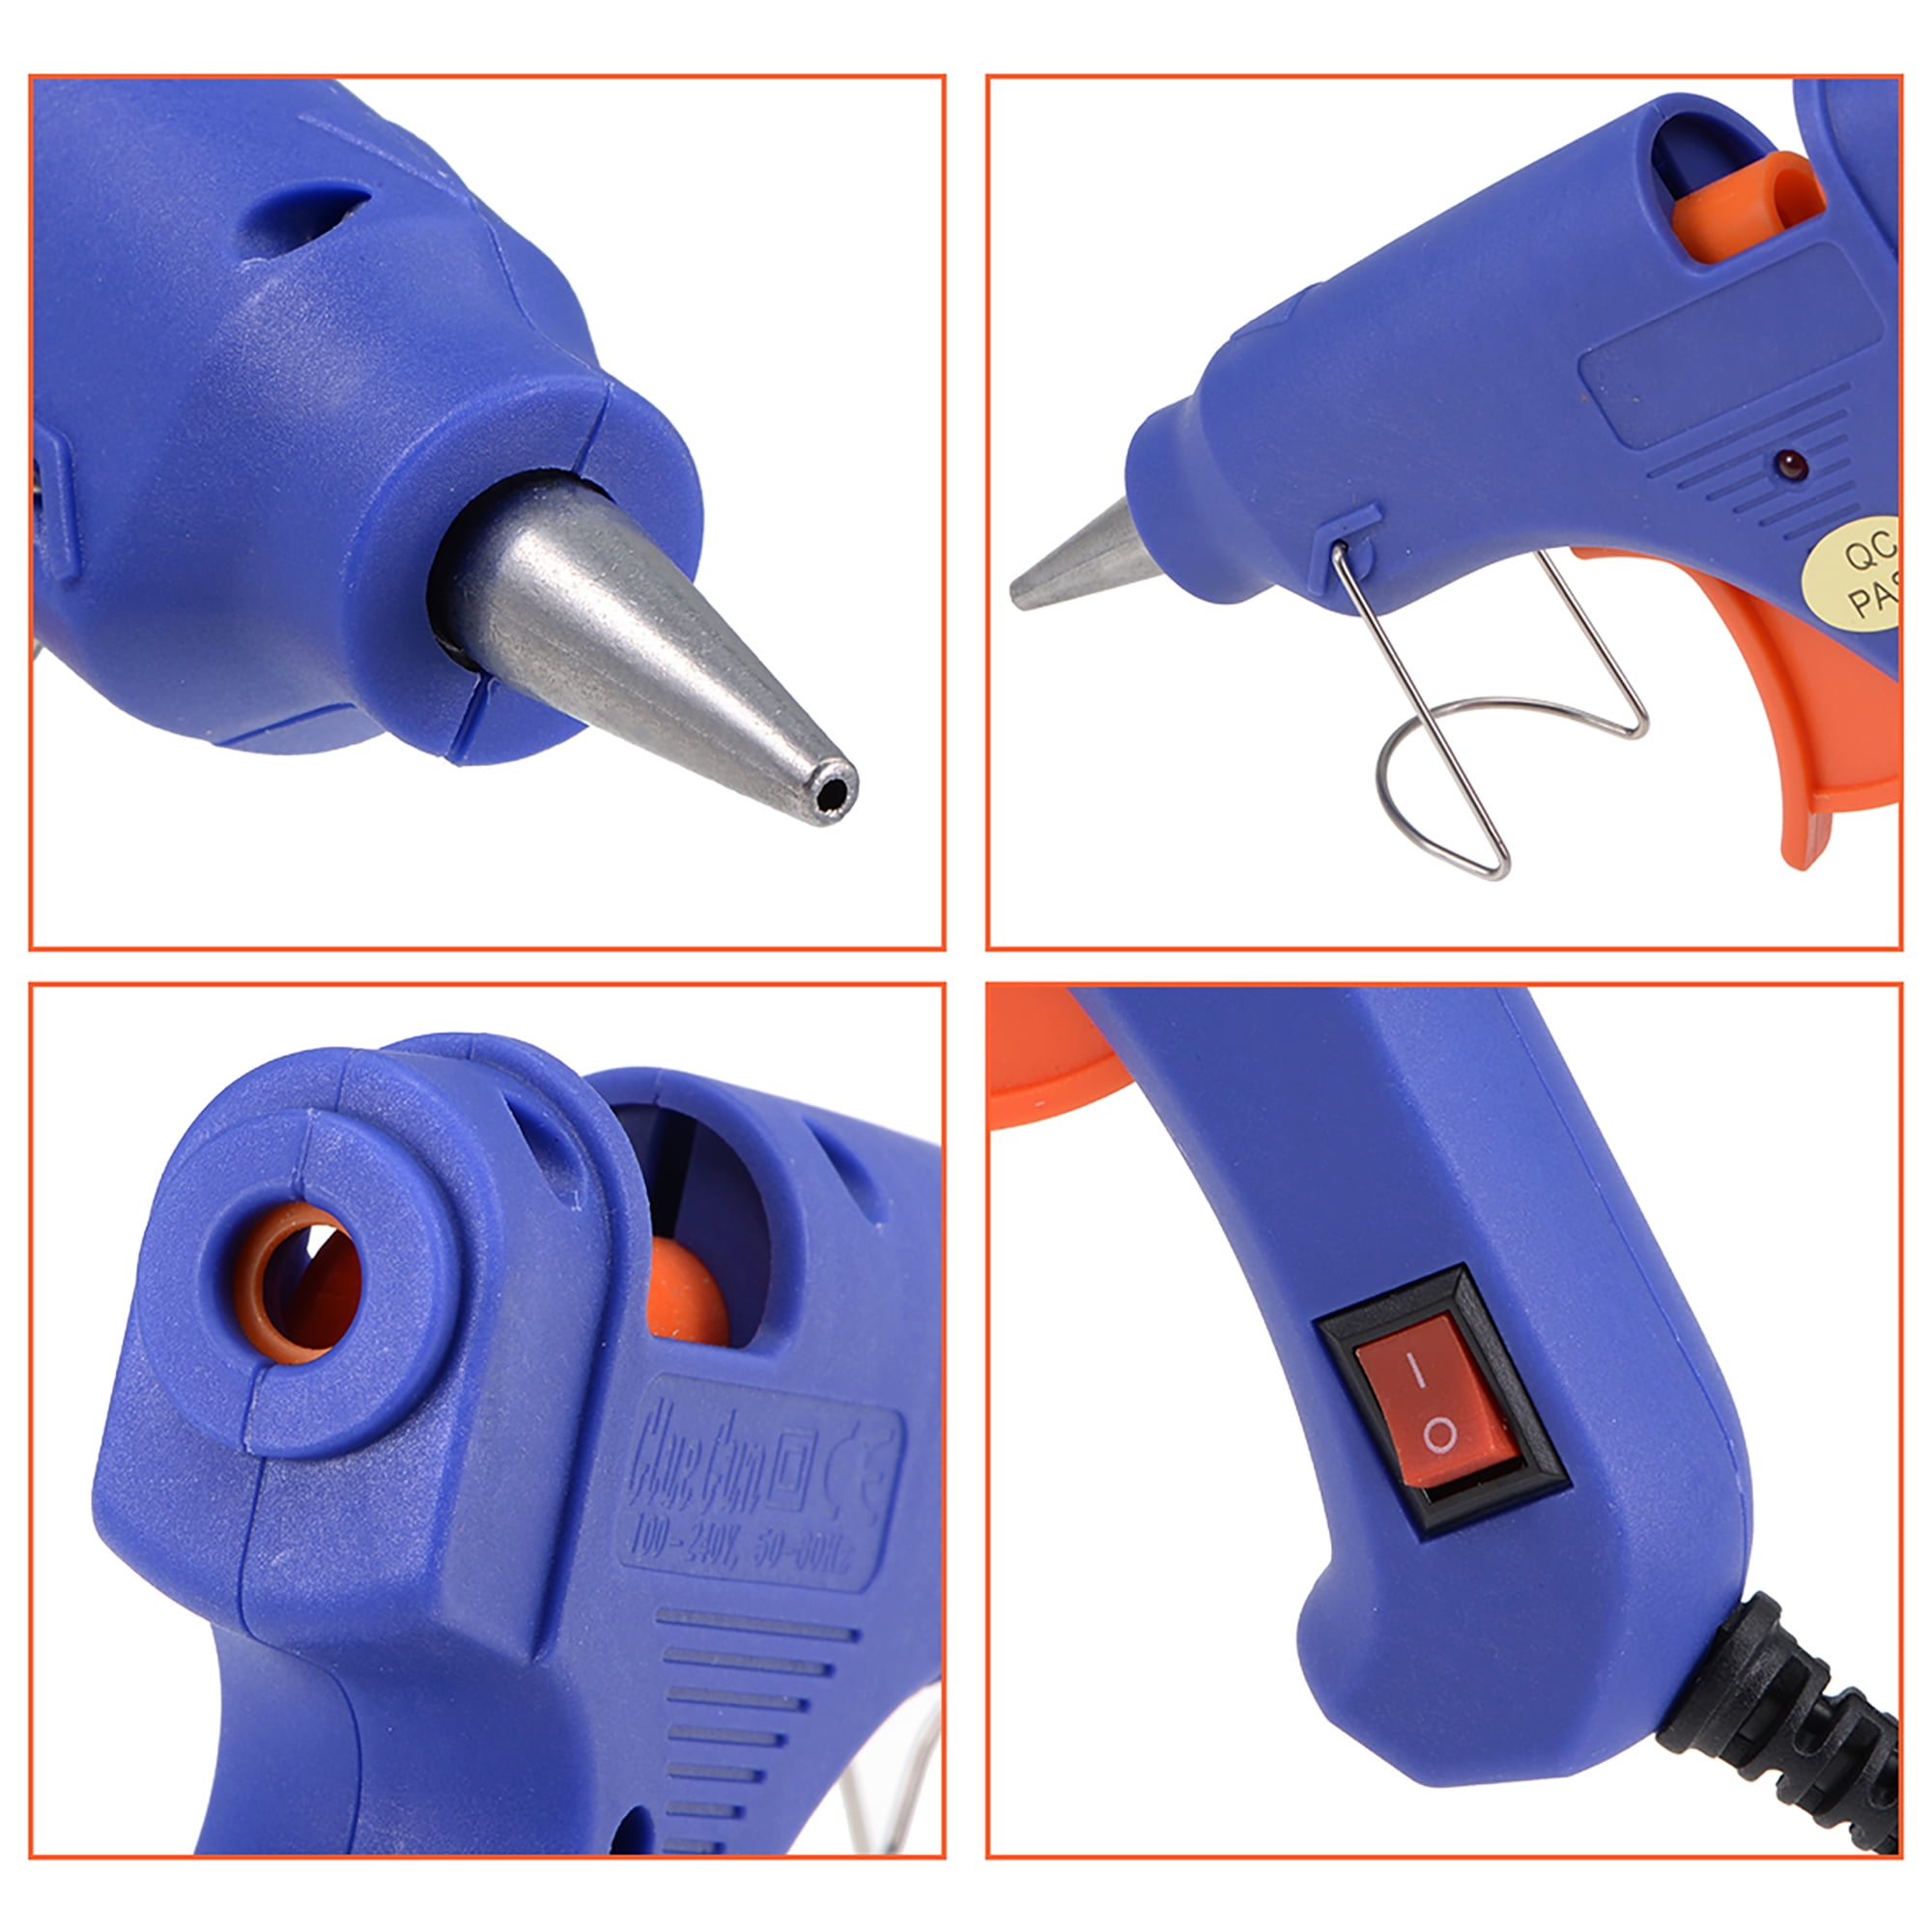 Multi Purpose 20W Hot Melt Glue Gun With Switch For DIY Crafts, Gold Filled  Jewelry Making, And Adhesive Dispensing 110 240V, 7mm Size From Dicas,  $7.03